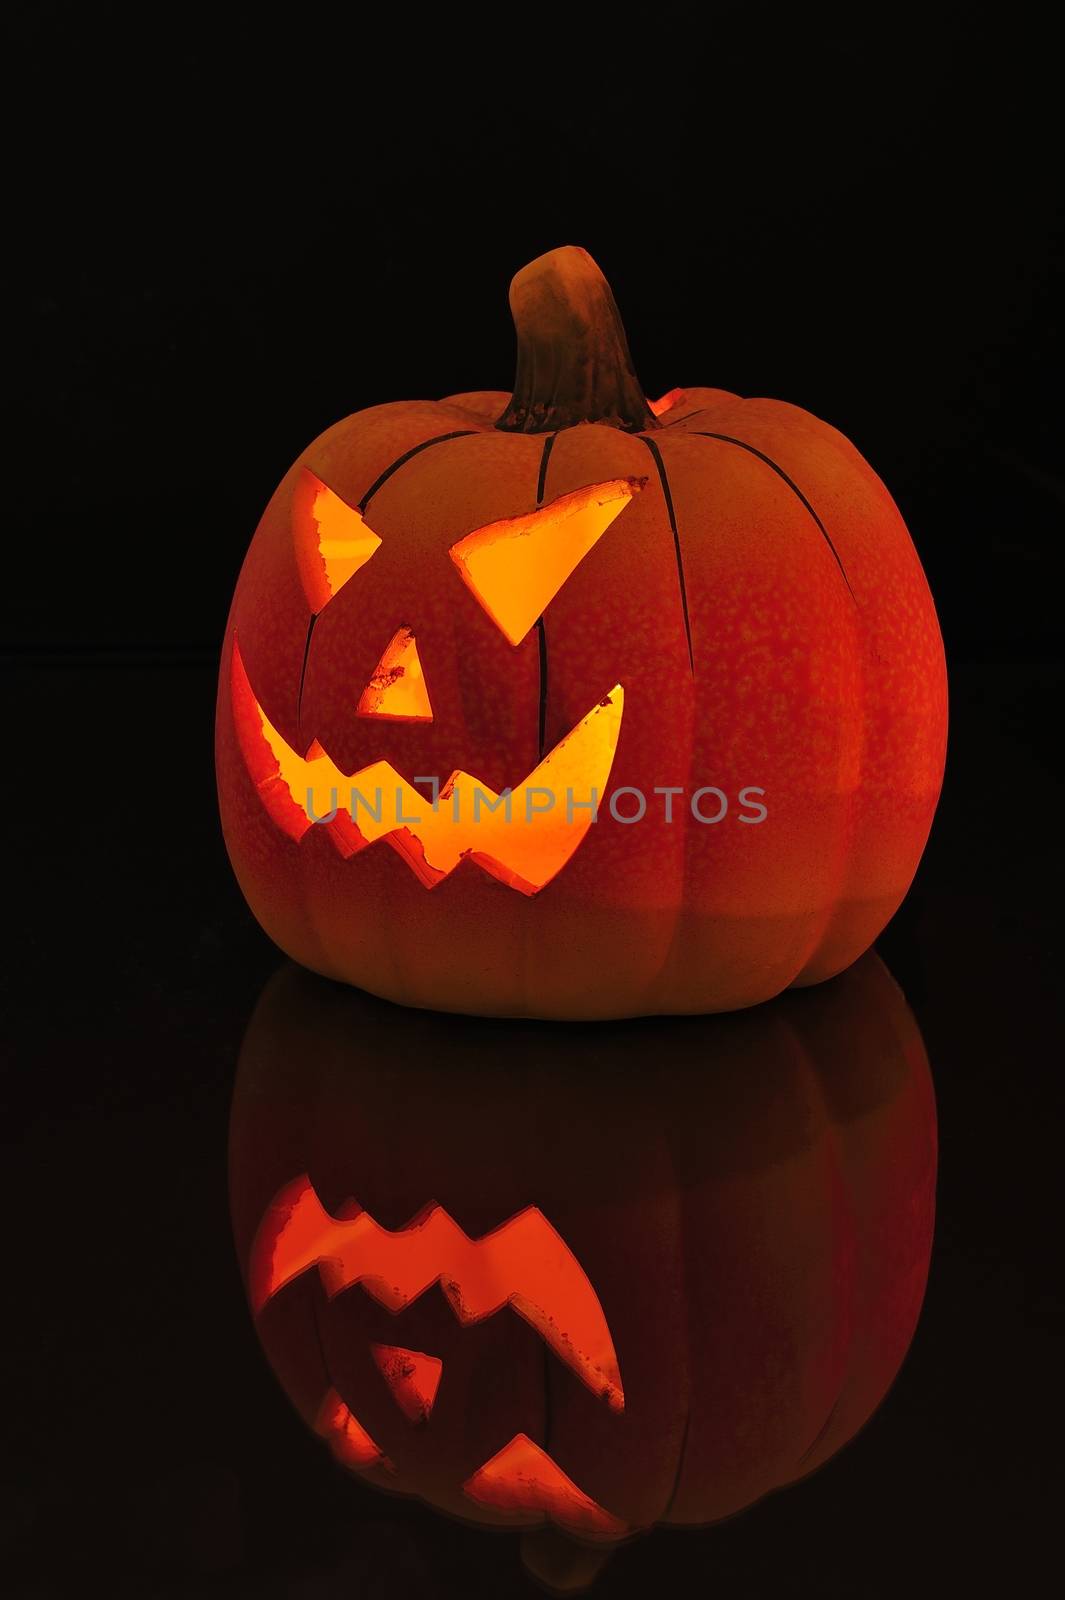 A candle lit and carved pumpkin casting a relection on a wooden floor.